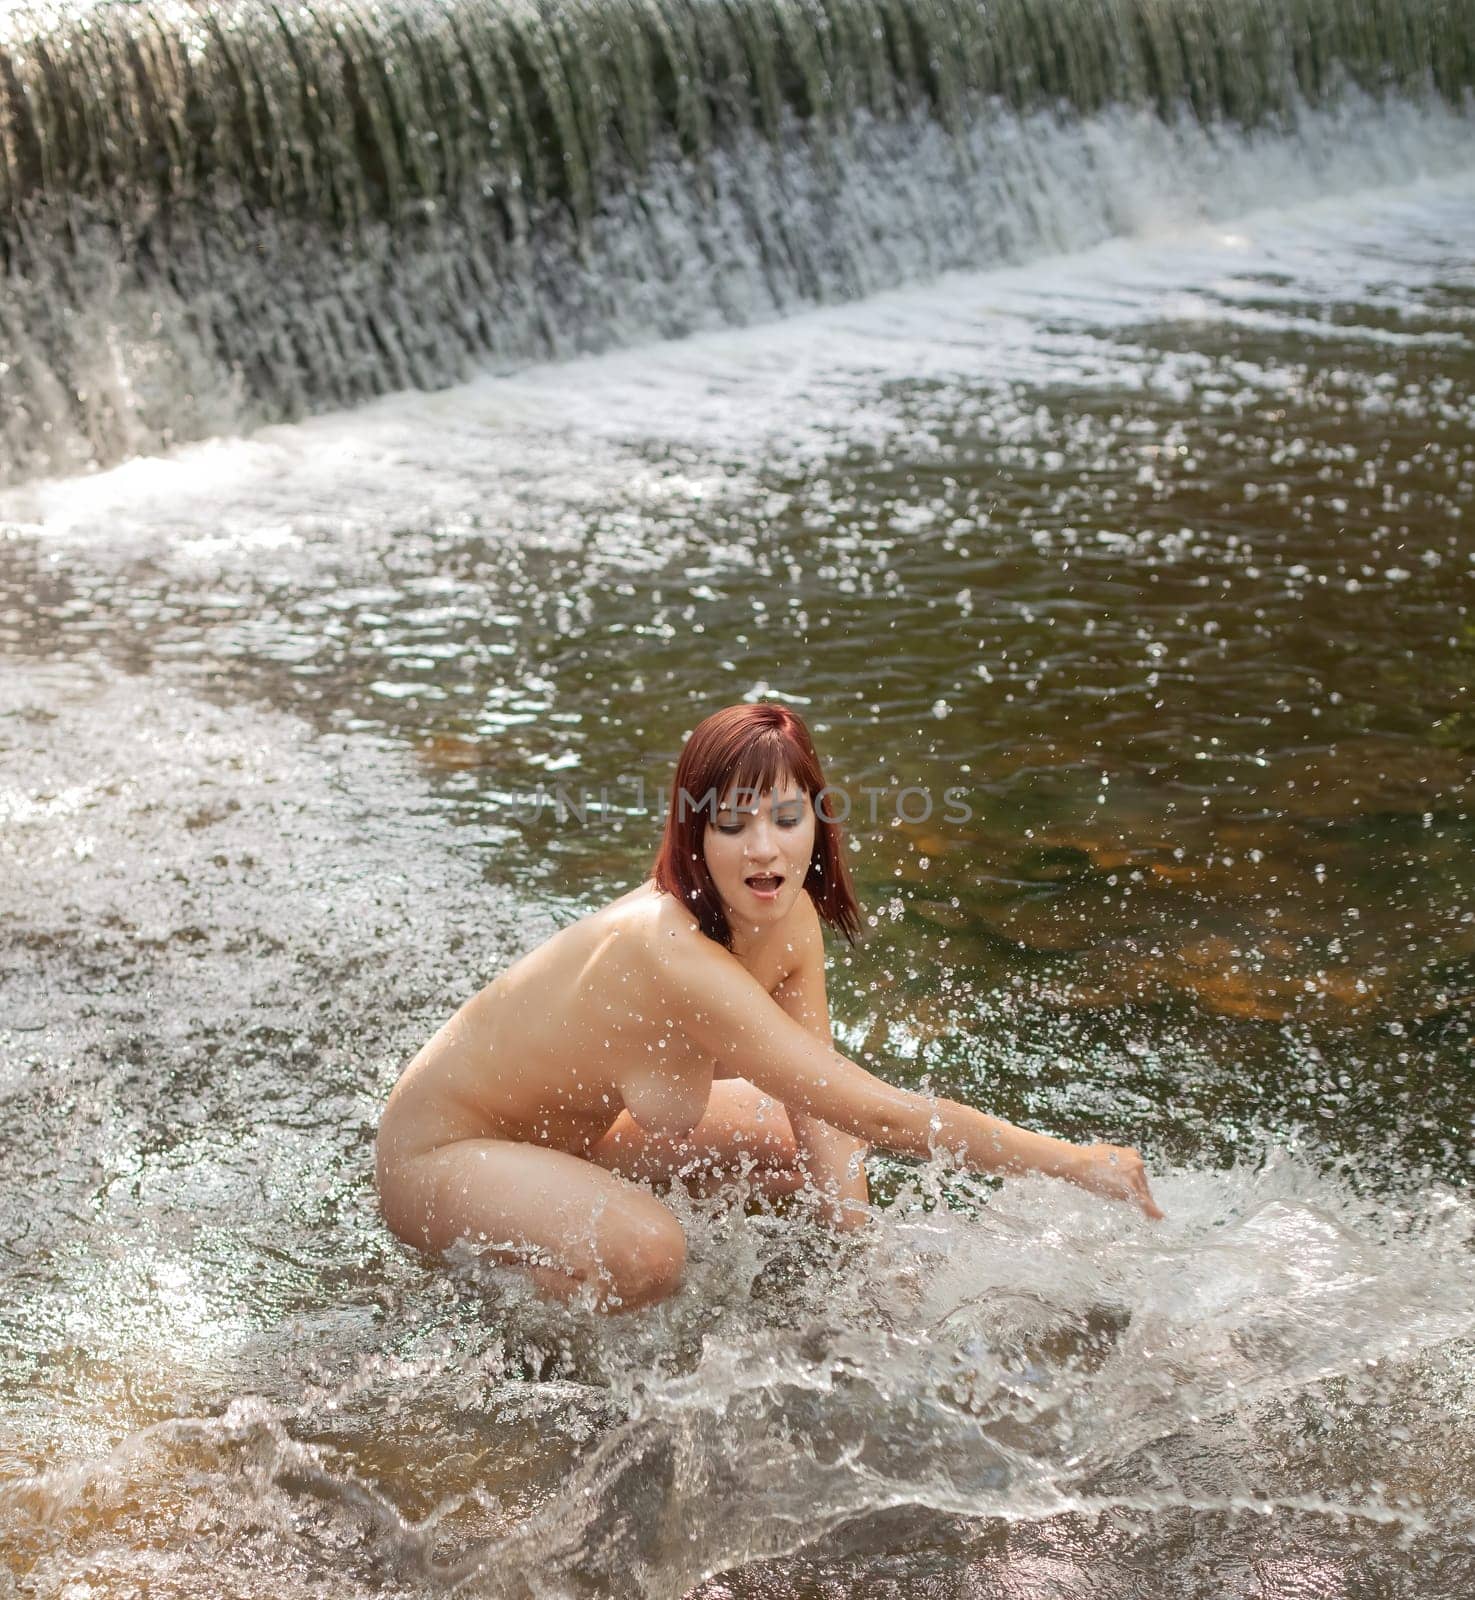 Young nude woman near a forest stream with a waterfall by palinchak